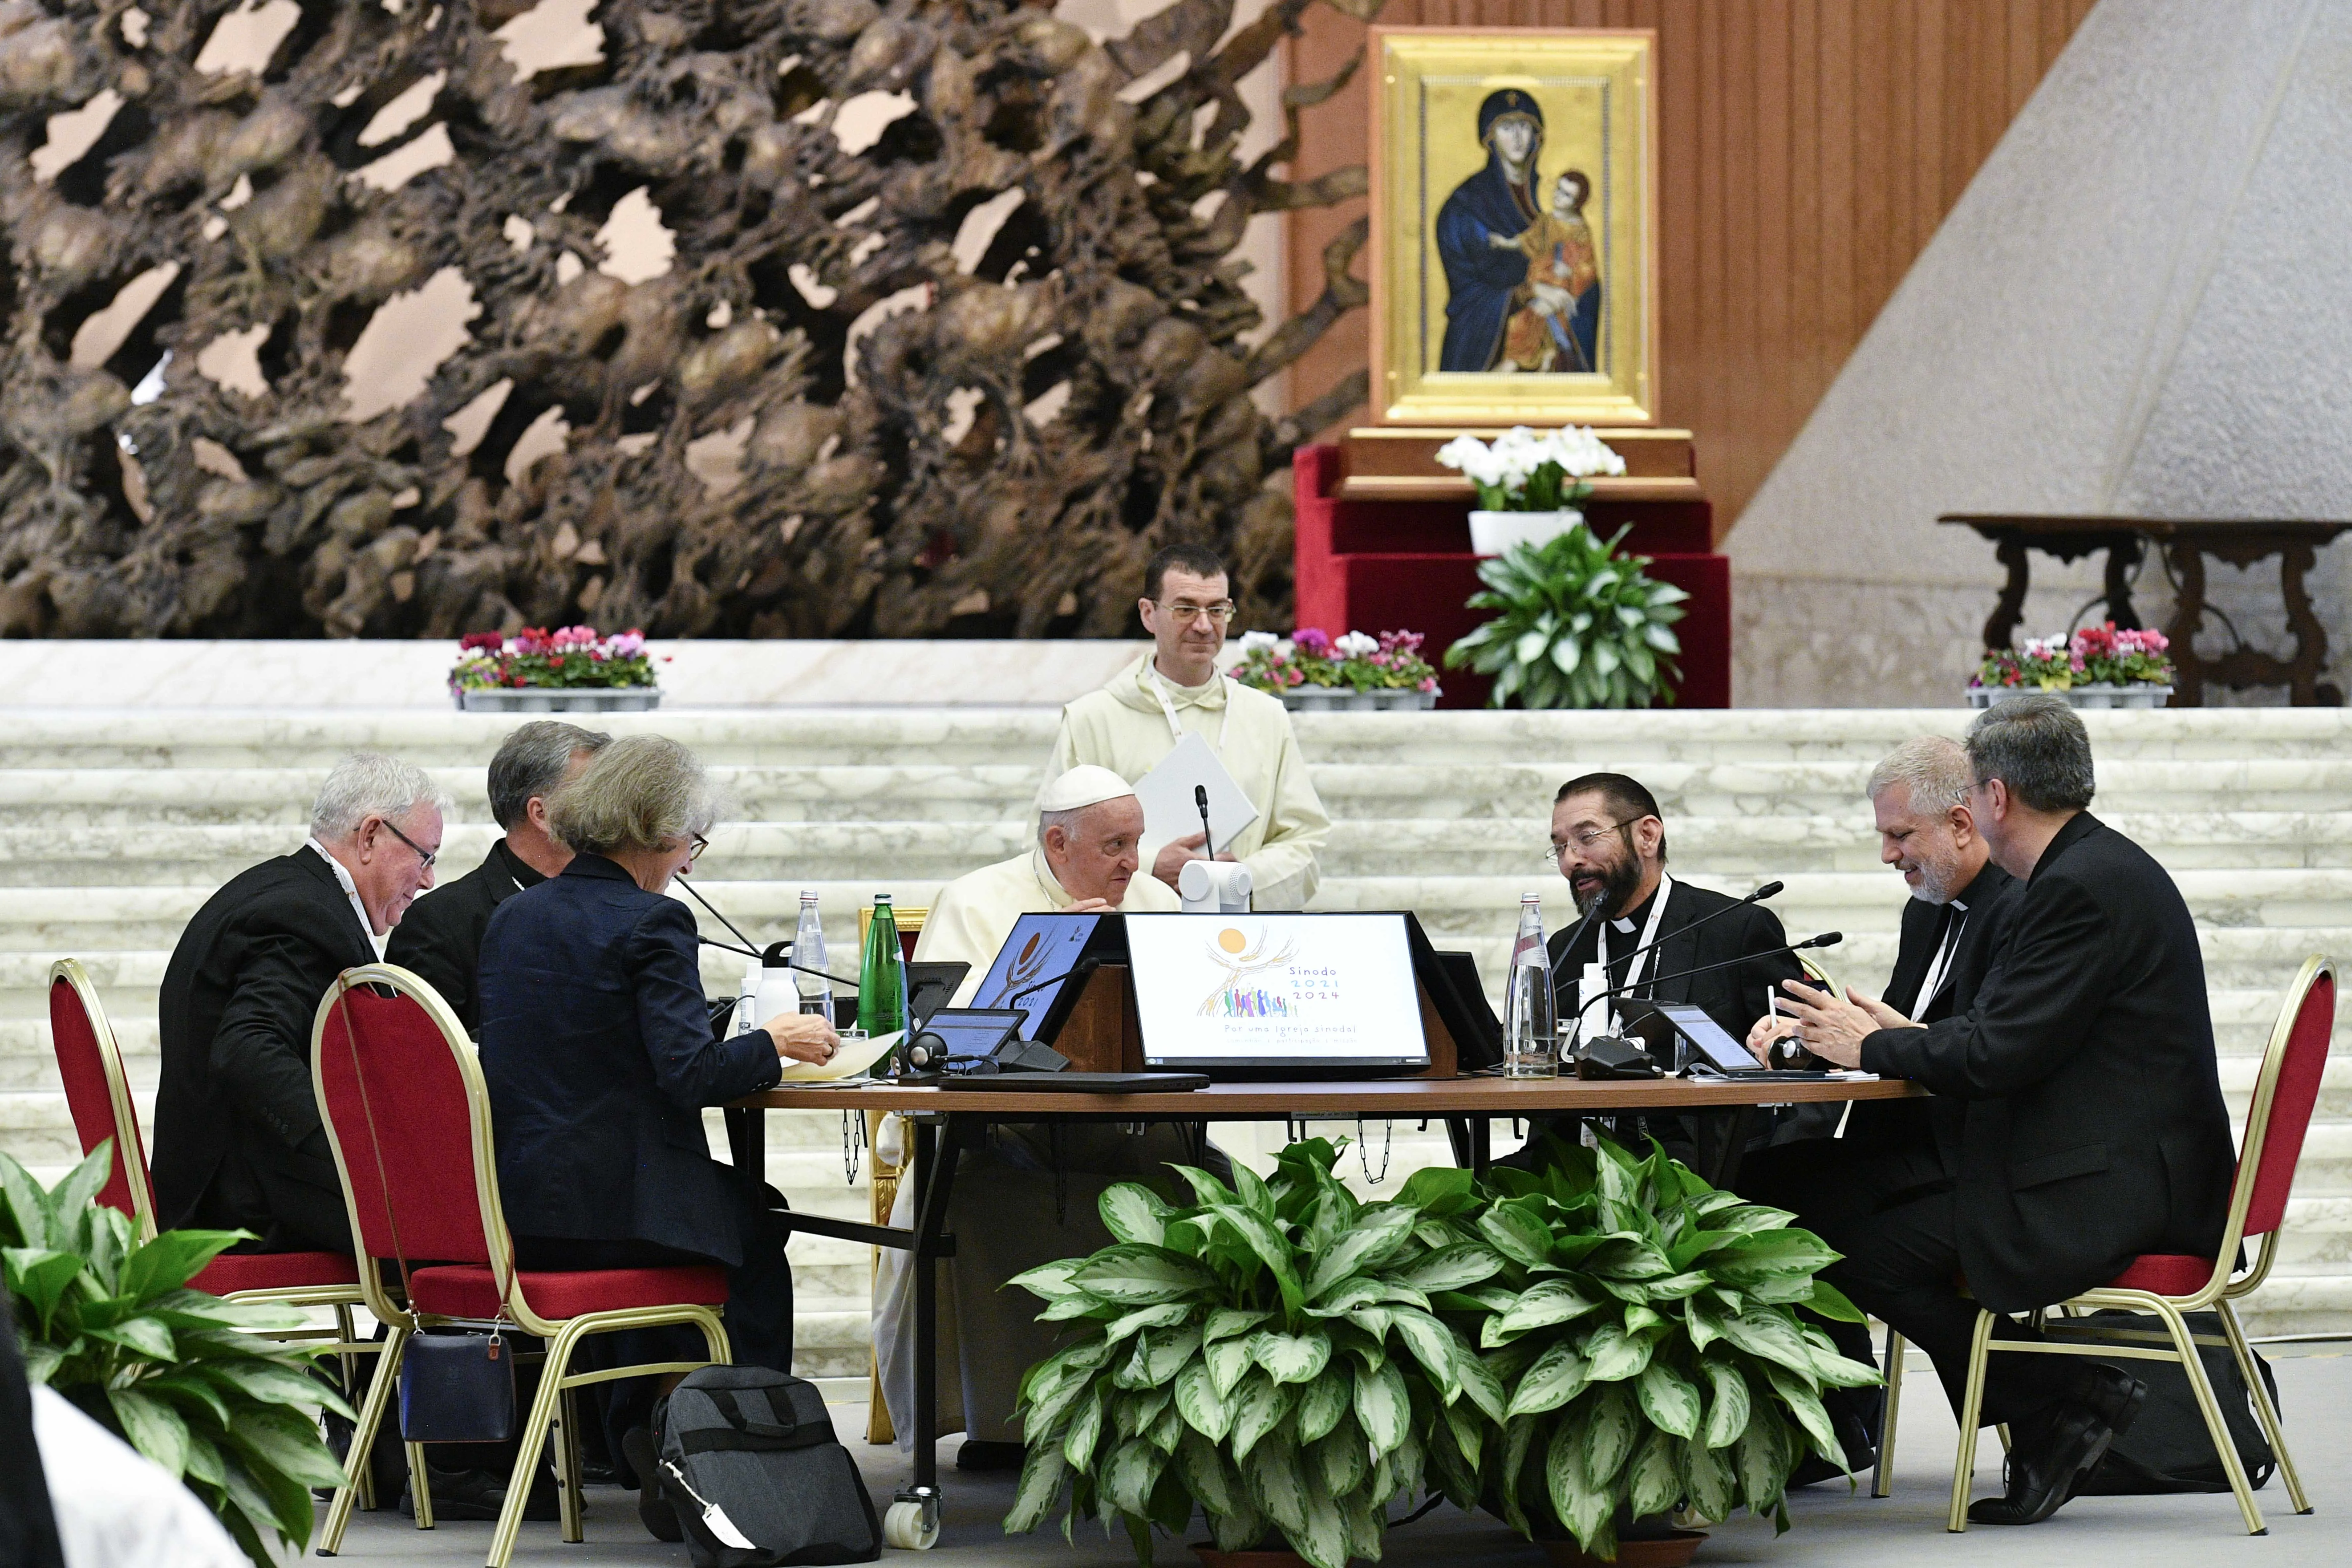 Pope Francis at the Synod on Synodality on Oct. 10, 2023.?w=200&h=150